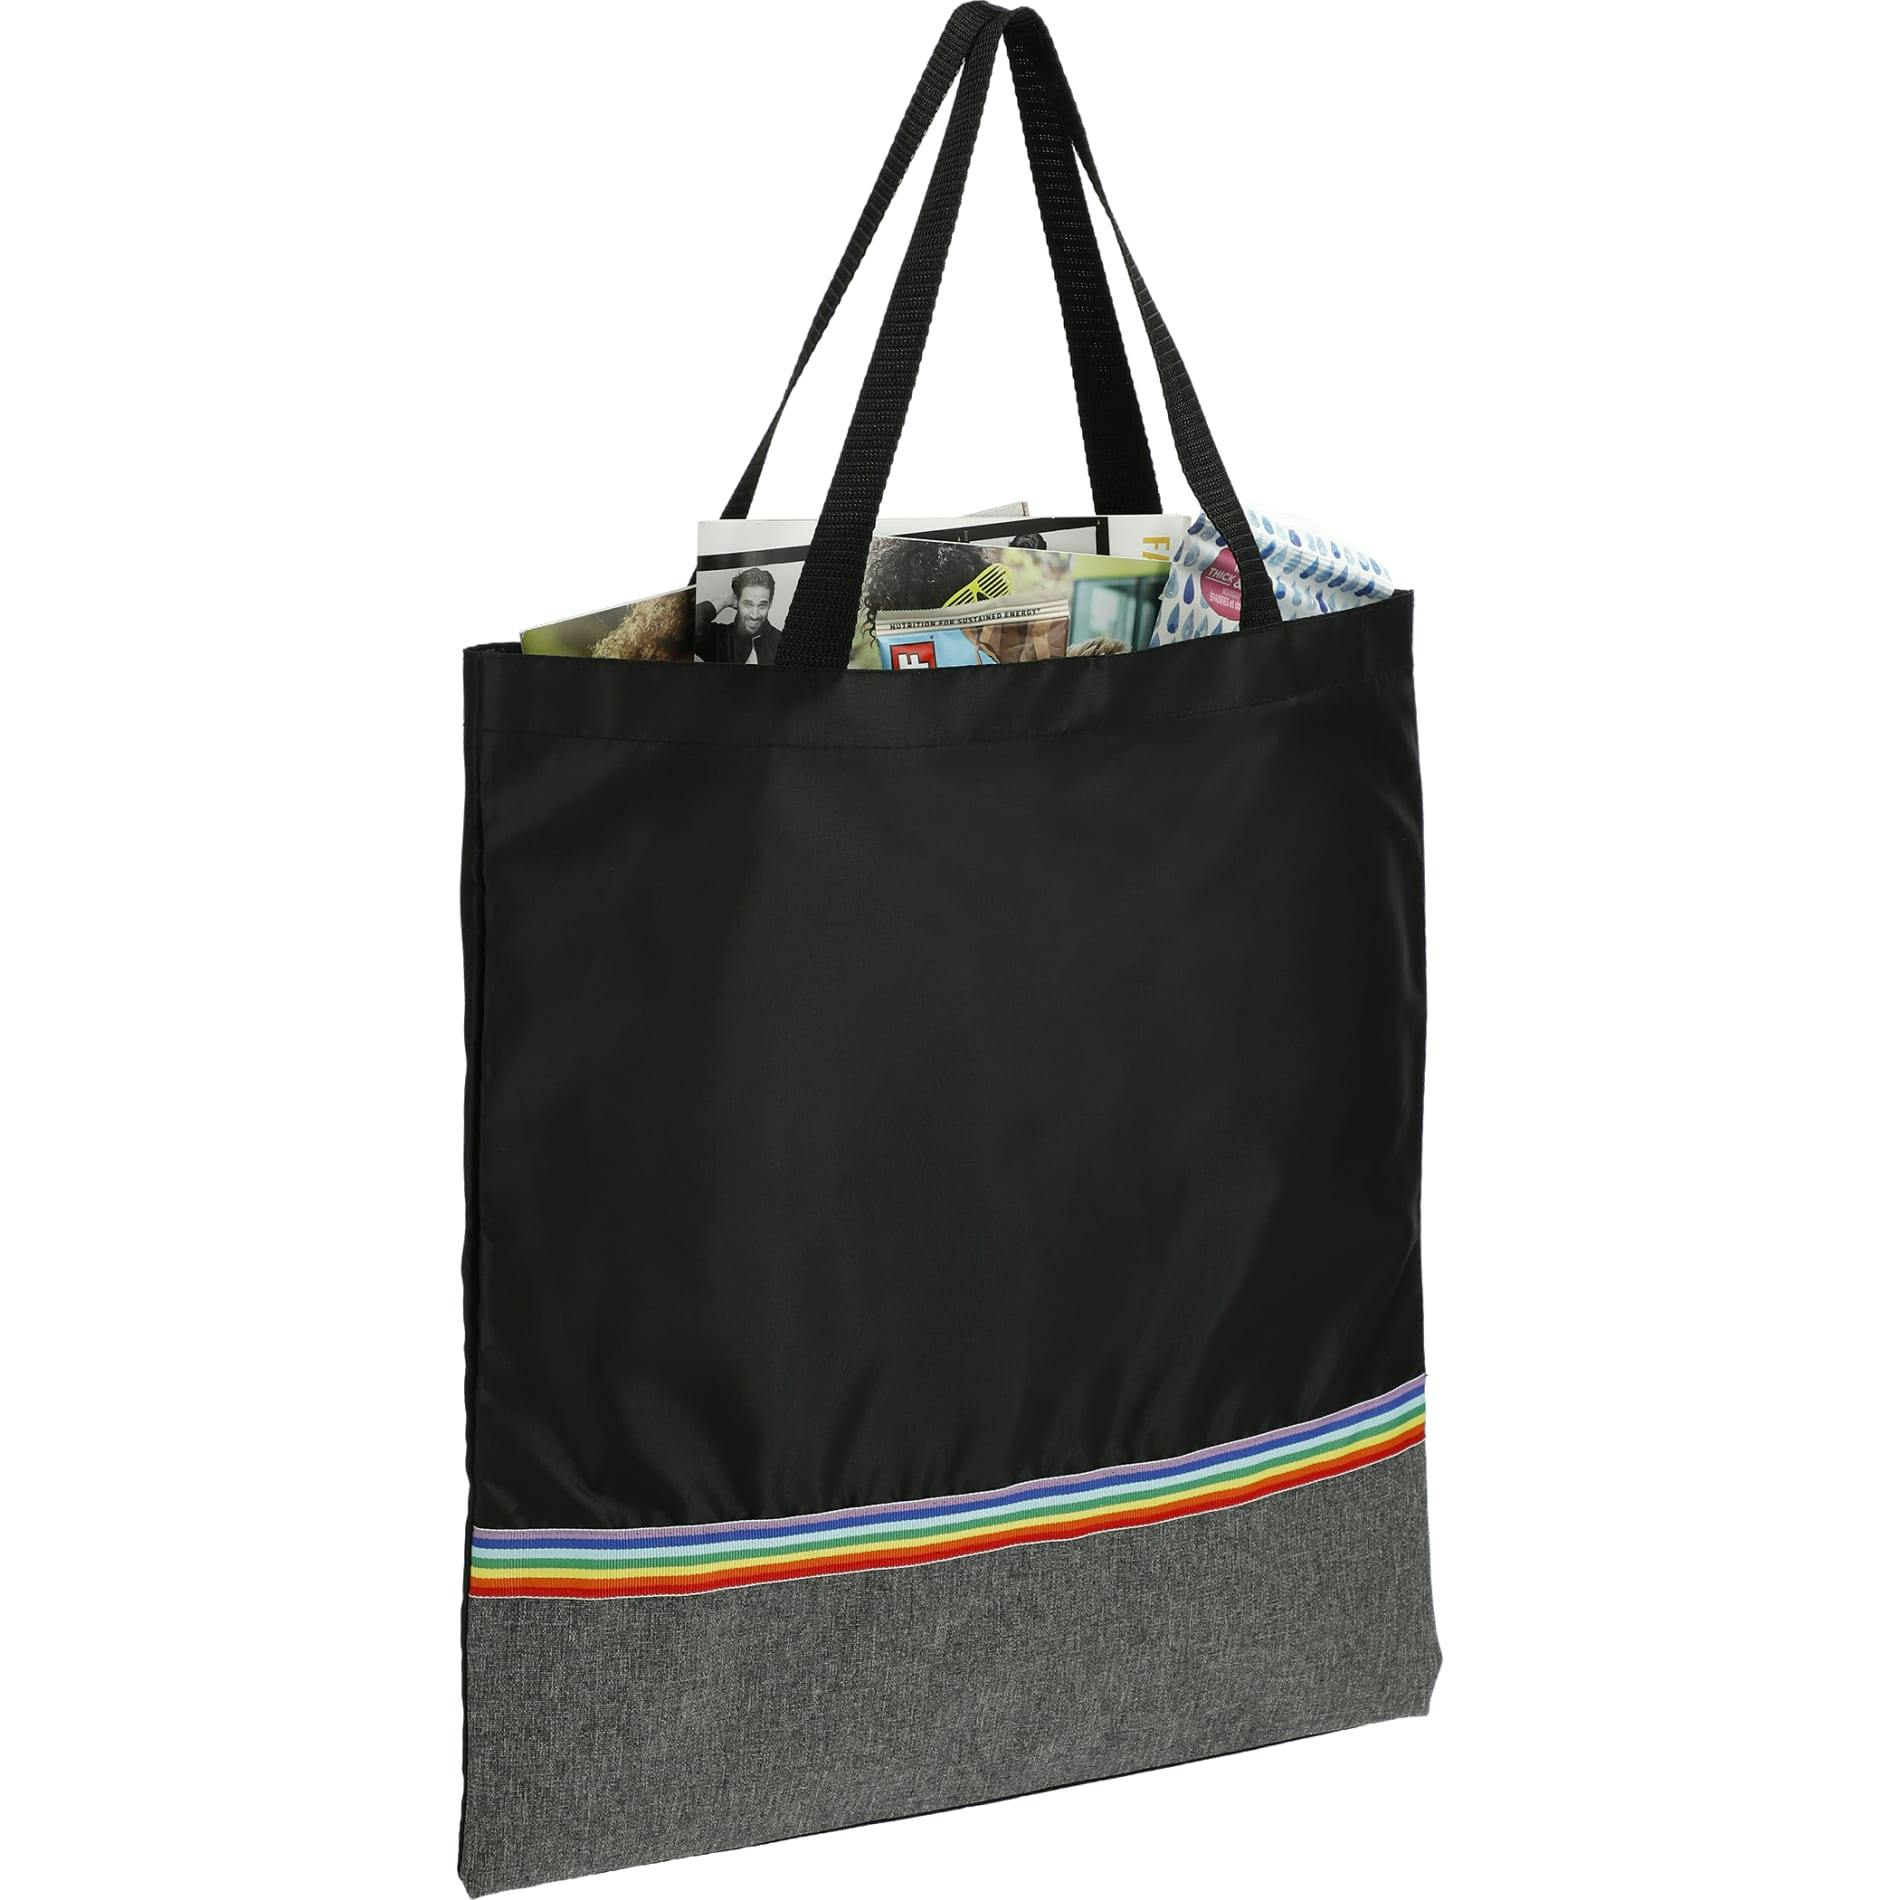 Rainbow RPET Convention Tote - additional Image 2